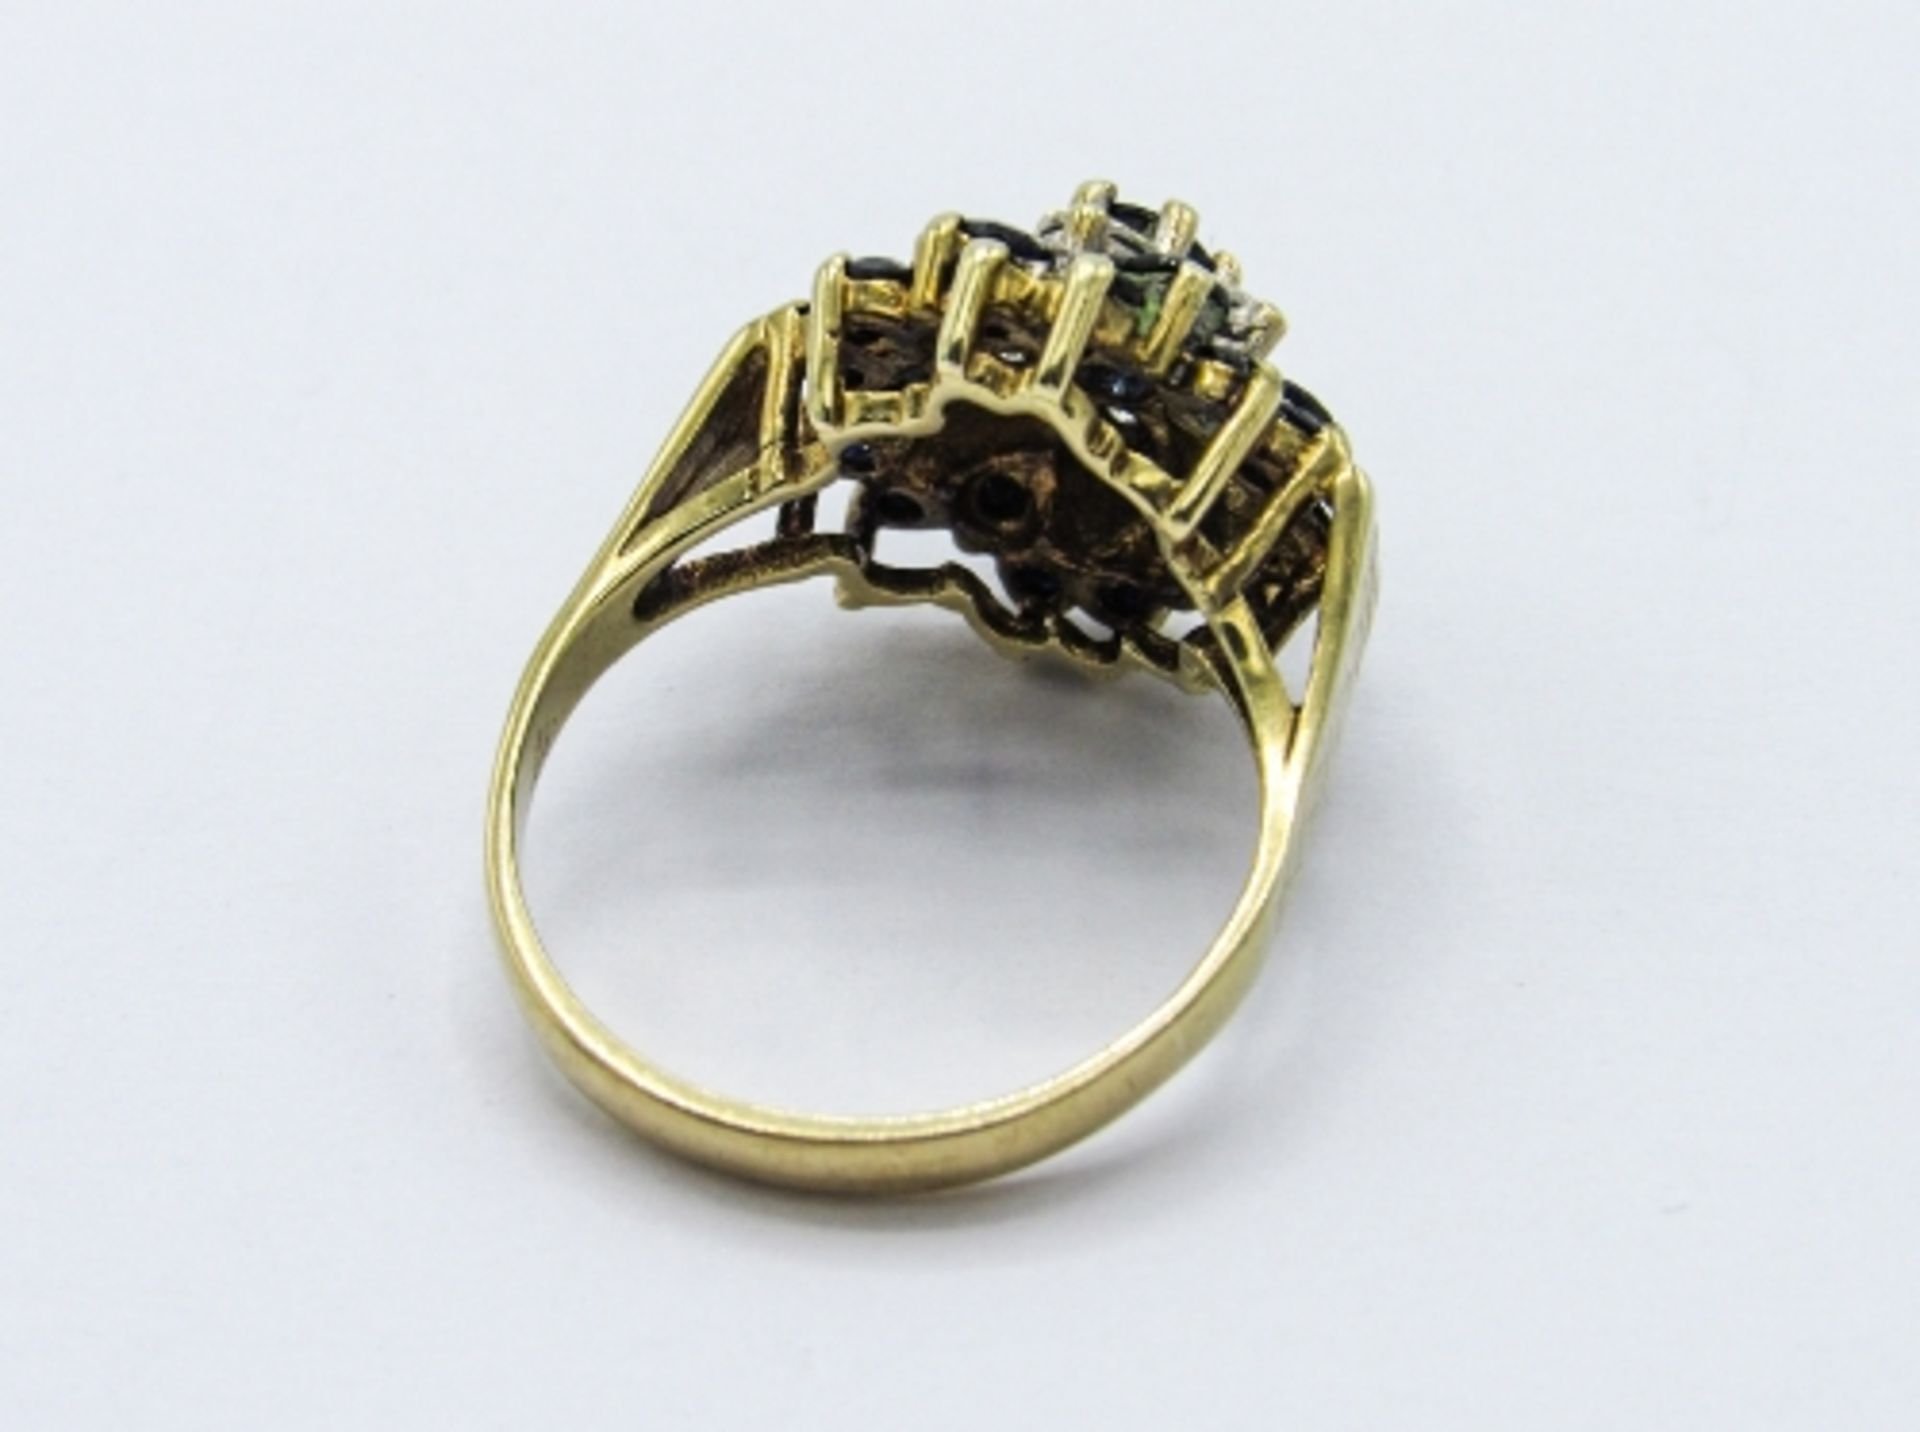 9ct gold sapphire & diamond ring, weight 3.7gms, size M. Estimate £130-150 - Image 2 of 4